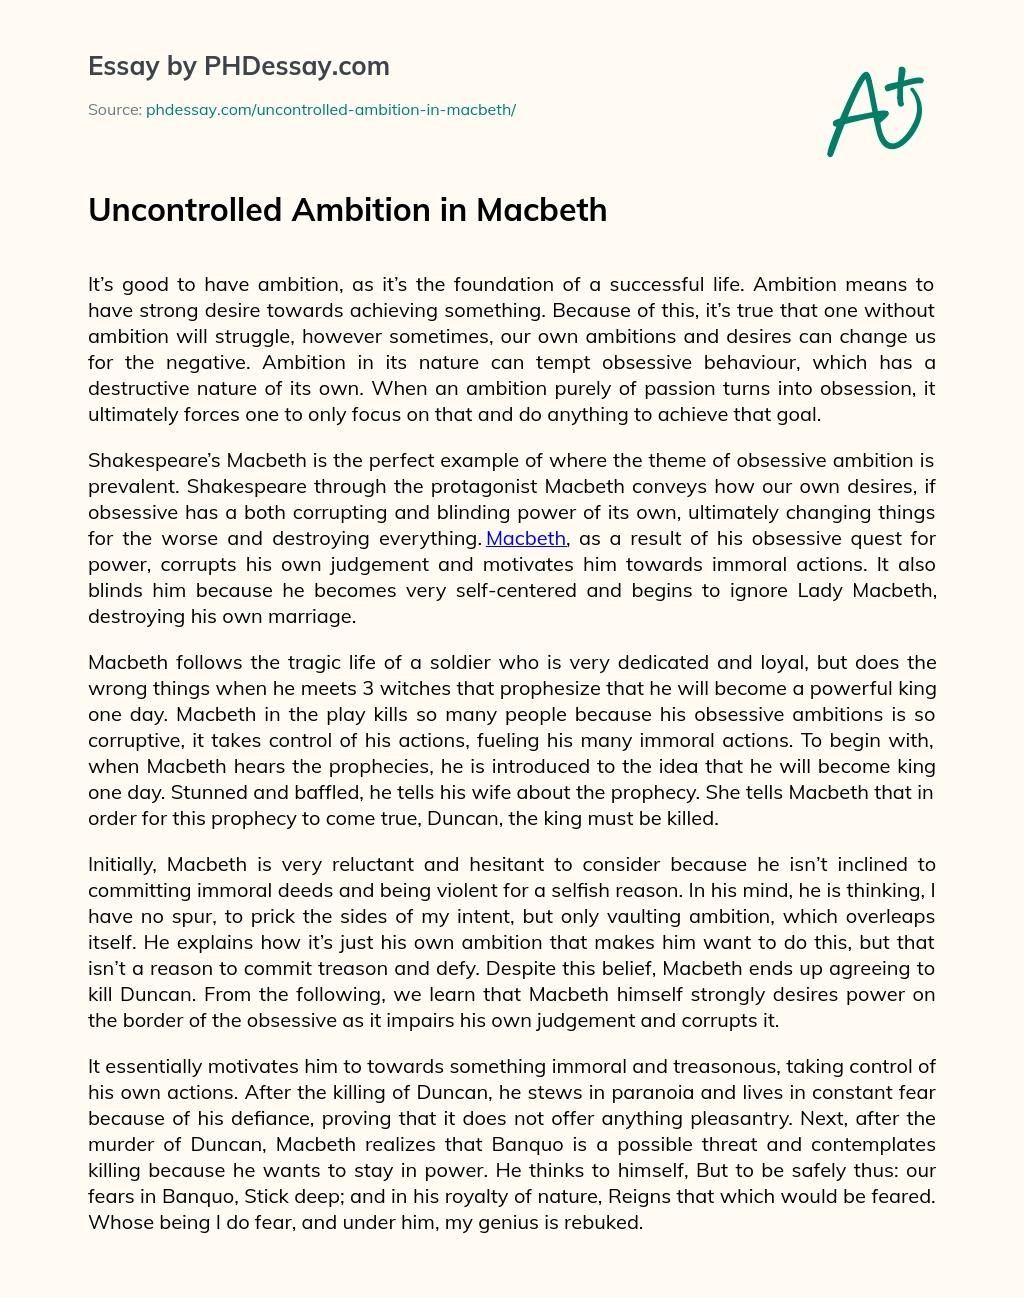 Uncontrolled Ambition in Macbeth essay